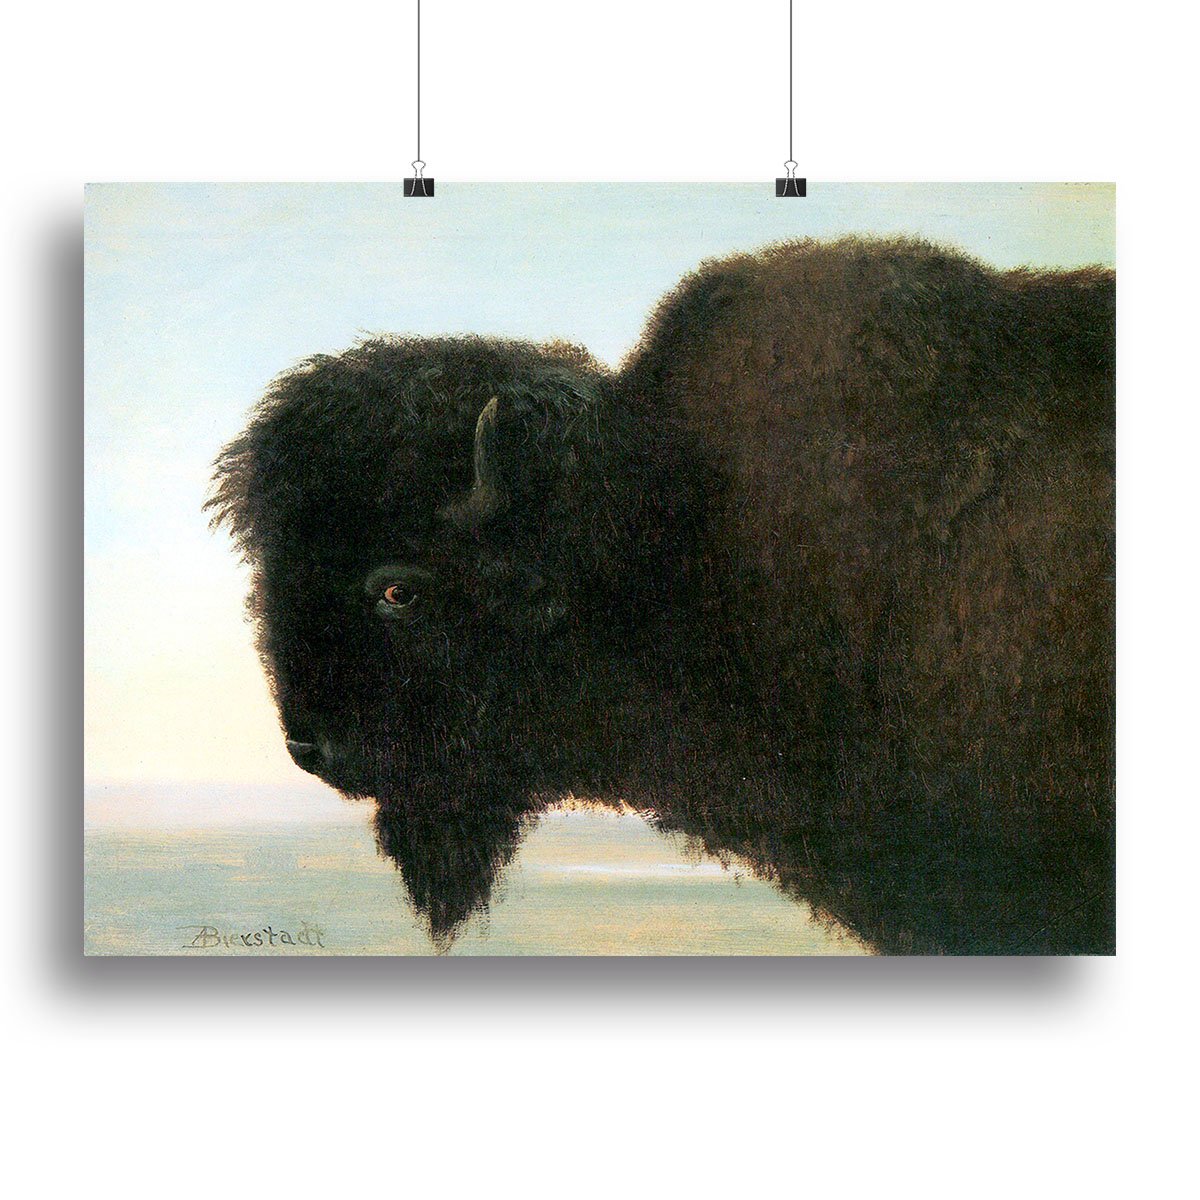 Buffalo Head by Bierstadt Canvas Print or Poster